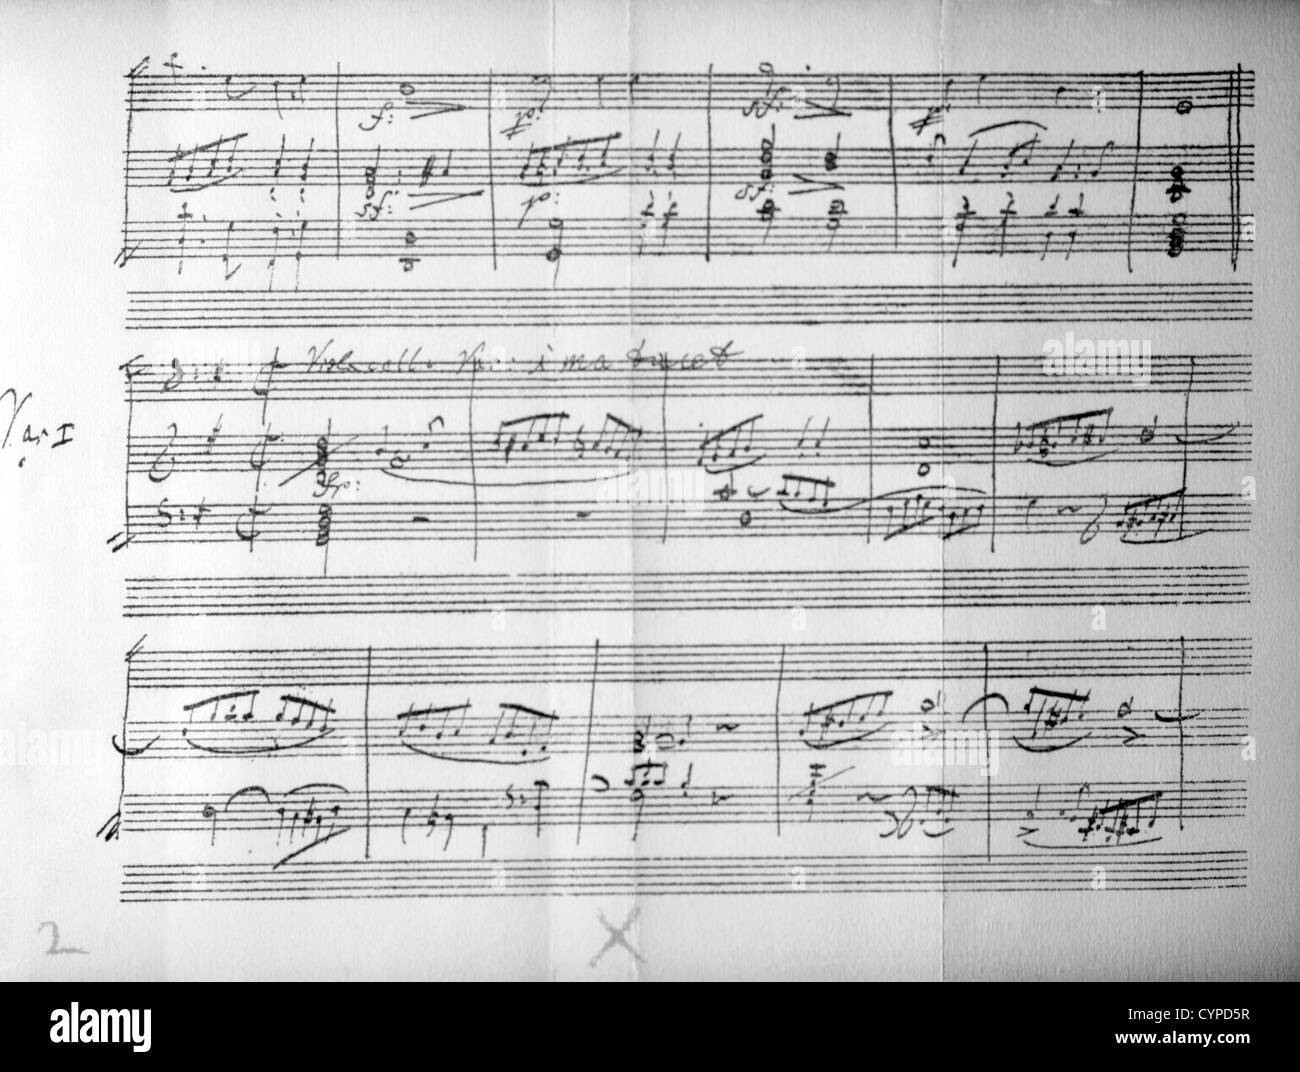 Music Manuscript from Beethoven, Variations on a Theme by Handel Stock Photo